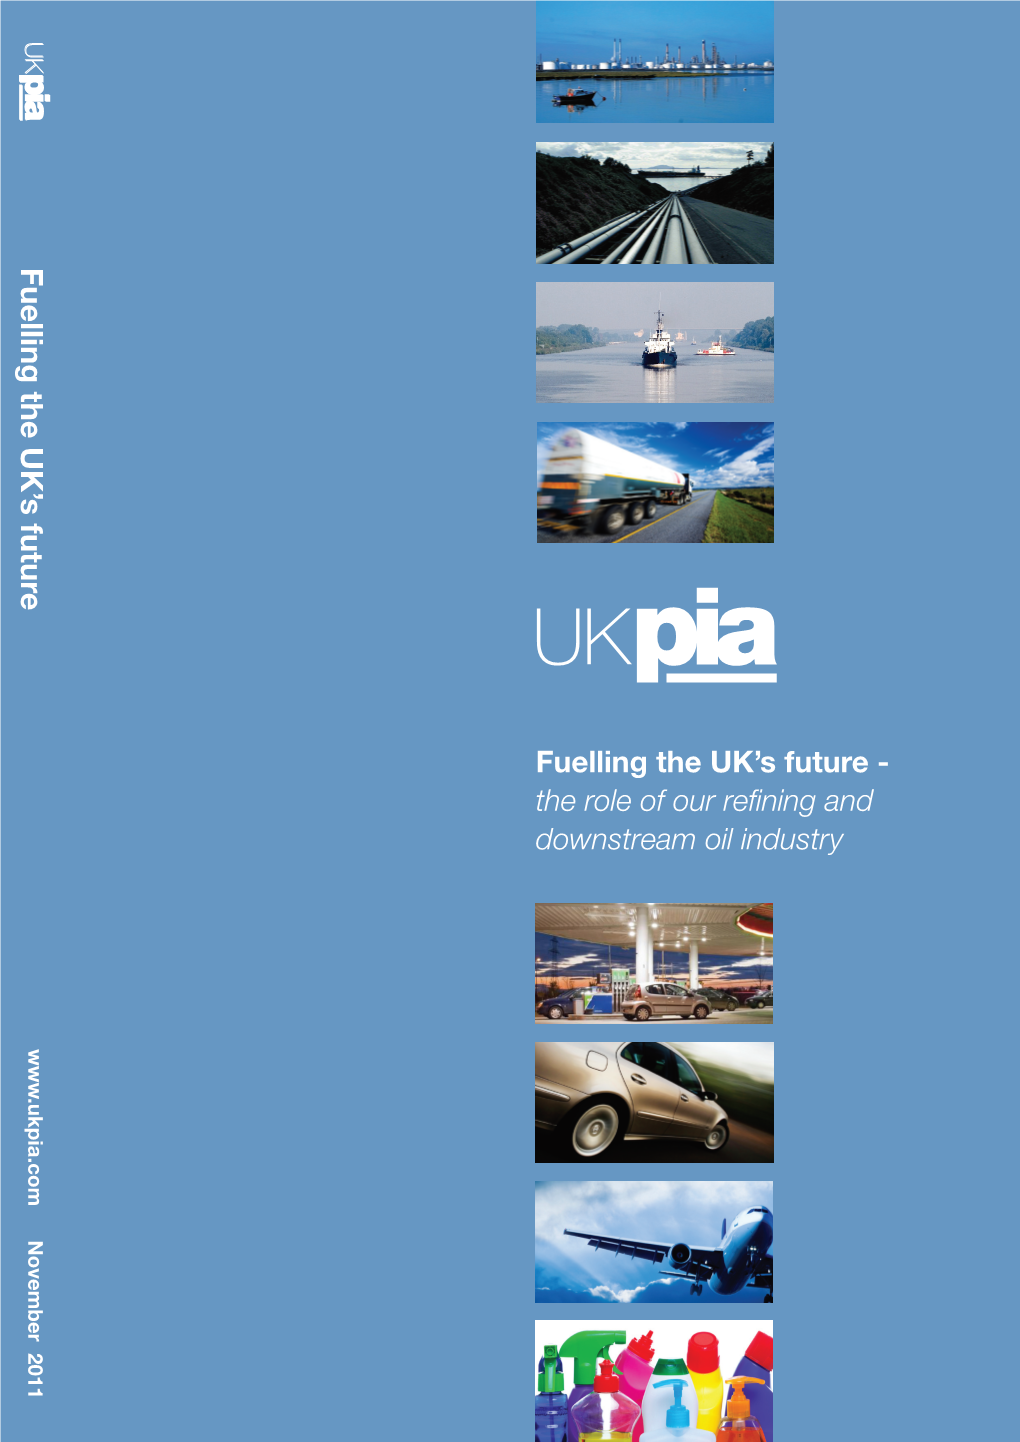 Fuelling the UK's Future